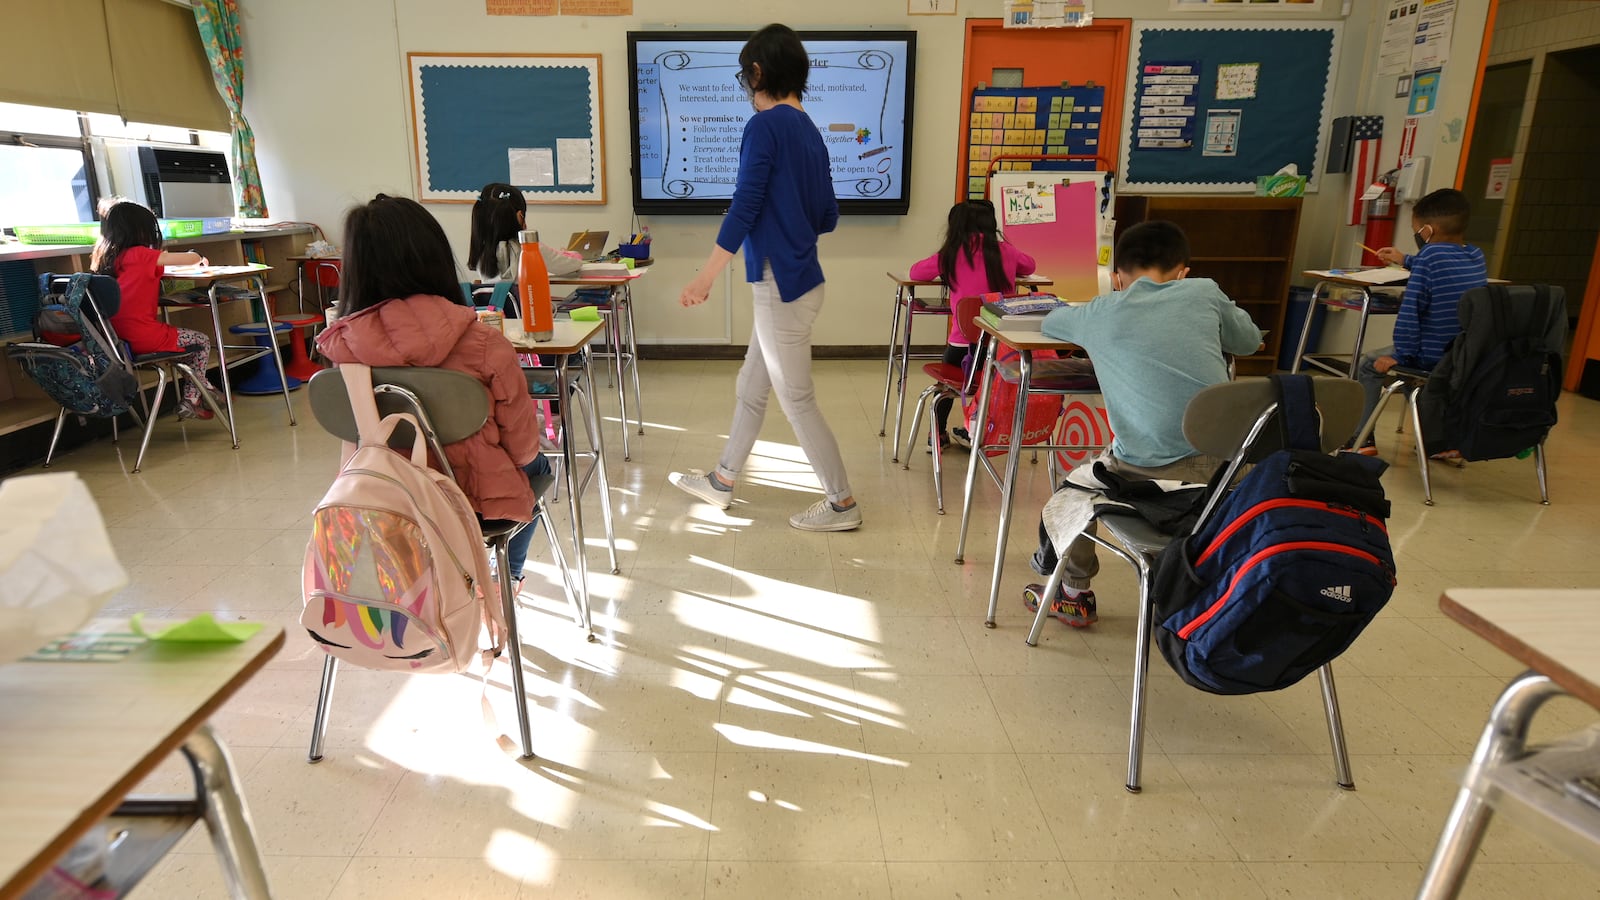 Students sit at their desks in a classroom during in-person instruction as their teacher walks through the room. There is a ray of light reflecting off of the floor of the classroom in between two rows of desks.